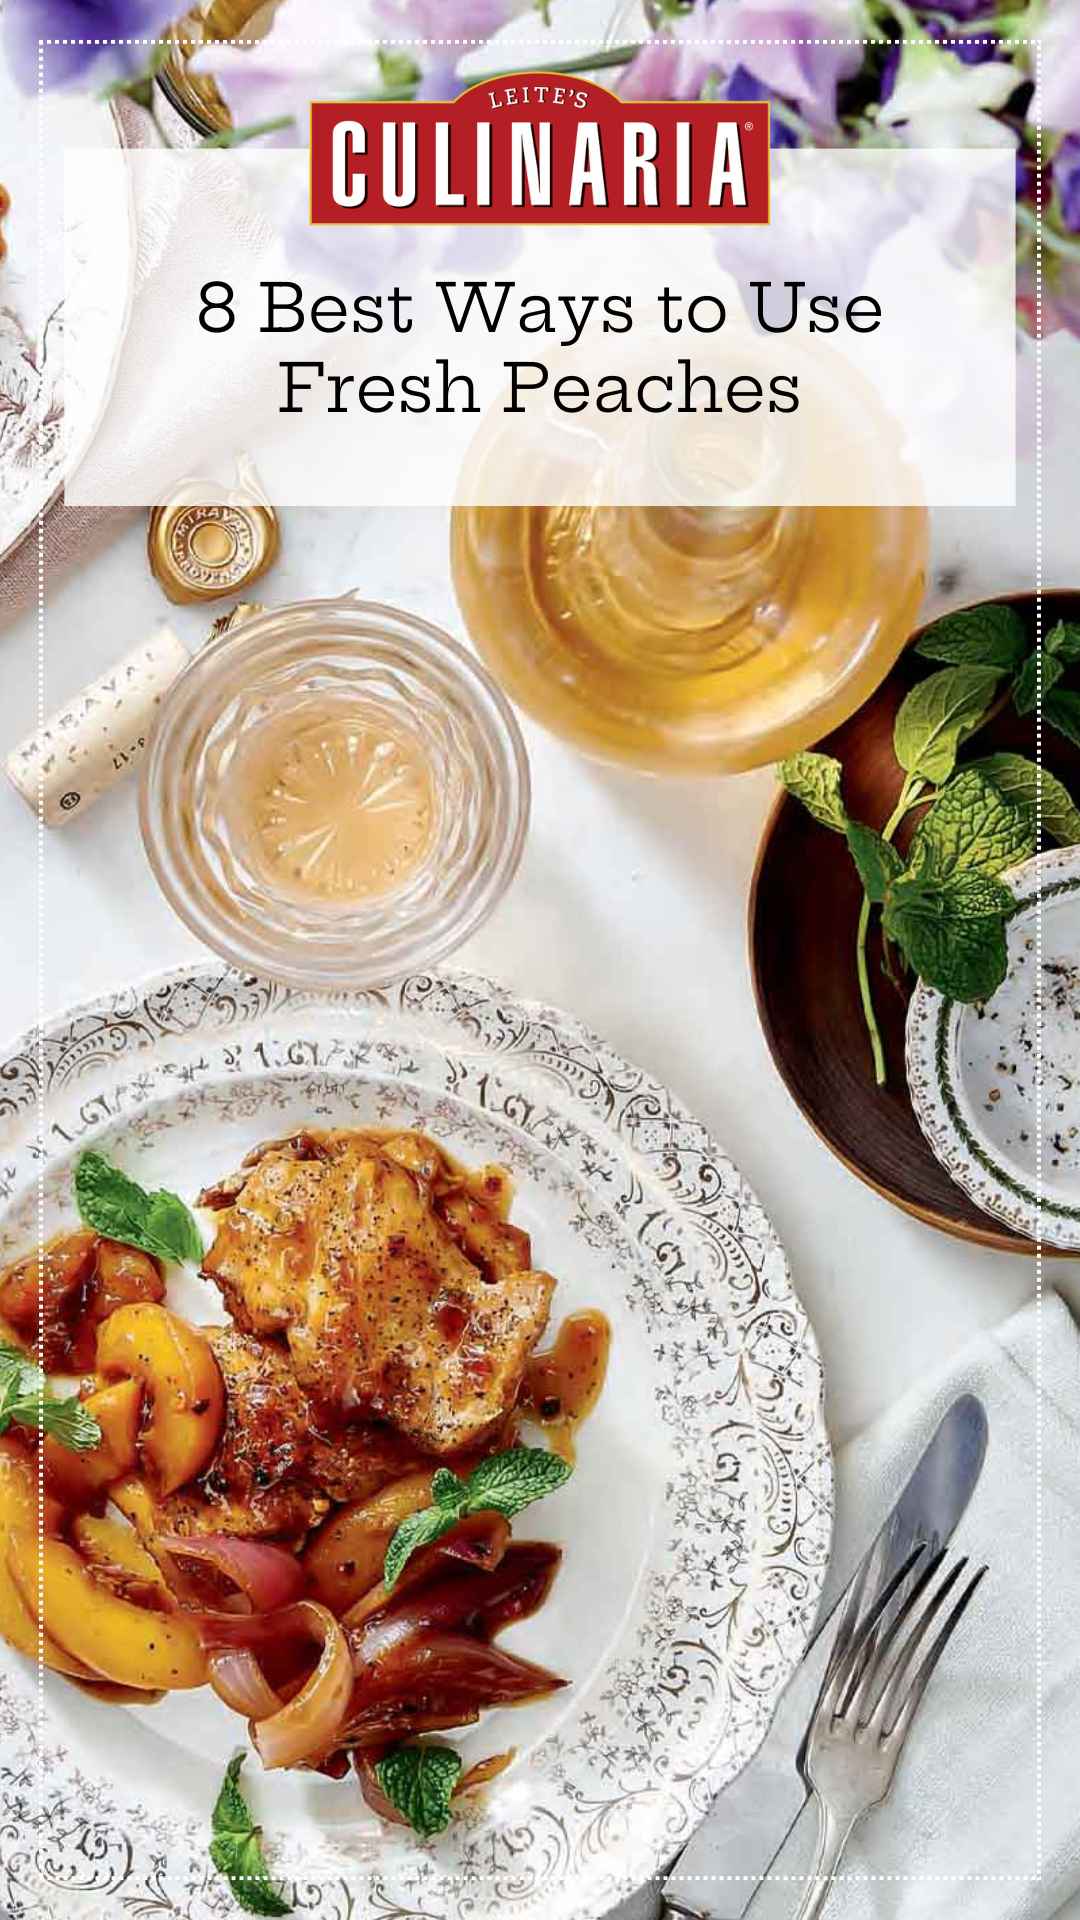 Chicken thighs and peaches on a plate with white wine, mint sprigs, and salt and pepper nearby.